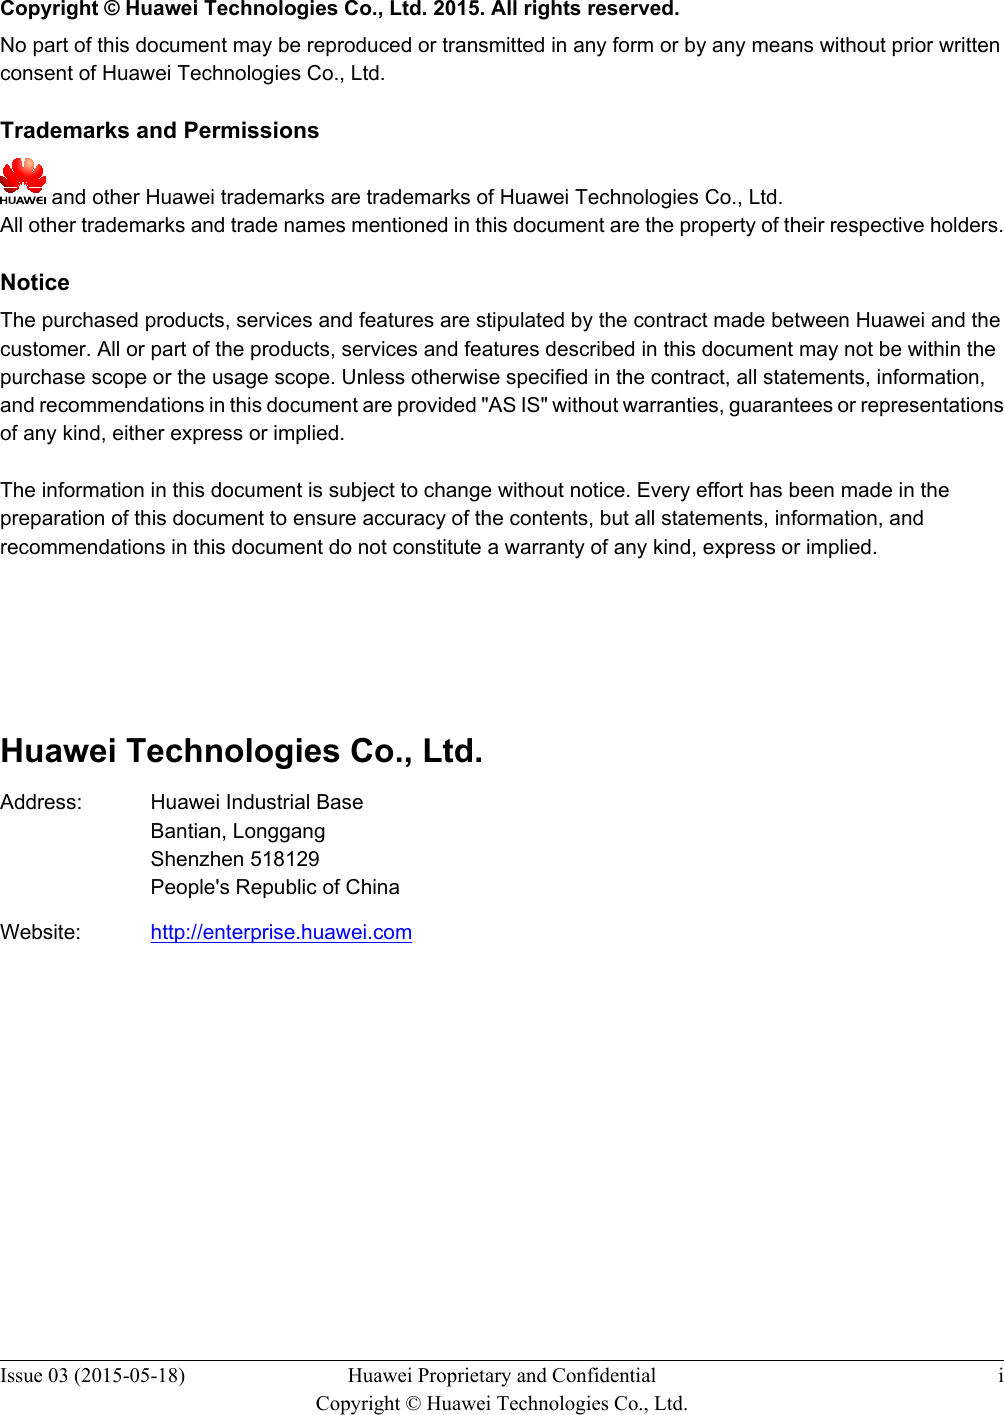   Copyright © Huawei Technologies Co., Ltd. 2015. All rights reserved.No part of this document may be reproduced or transmitted in any form or by any means without prior writtenconsent of Huawei Technologies Co., Ltd. Trademarks and Permissions and other Huawei trademarks are trademarks of Huawei Technologies Co., Ltd.All other trademarks and trade names mentioned in this document are the property of their respective holders. NoticeThe purchased products, services and features are stipulated by the contract made between Huawei and thecustomer. All or part of the products, services and features described in this document may not be within thepurchase scope or the usage scope. Unless otherwise specified in the contract, all statements, information,and recommendations in this document are provided &quot;AS IS&quot; without warranties, guarantees or representationsof any kind, either express or implied.The information in this document is subject to change without notice. Every effort has been made in thepreparation of this document to ensure accuracy of the contents, but all statements, information, andrecommendations in this document do not constitute a warranty of any kind, express or implied.       Huawei Technologies Co., Ltd.Address: Huawei Industrial BaseBantian, LonggangShenzhen 518129People&apos;s Republic of ChinaWebsite: http://enterprise.huawei.comIssue 03 (2015-05-18) Huawei Proprietary and ConfidentialCopyright © Huawei Technologies Co., Ltd.i